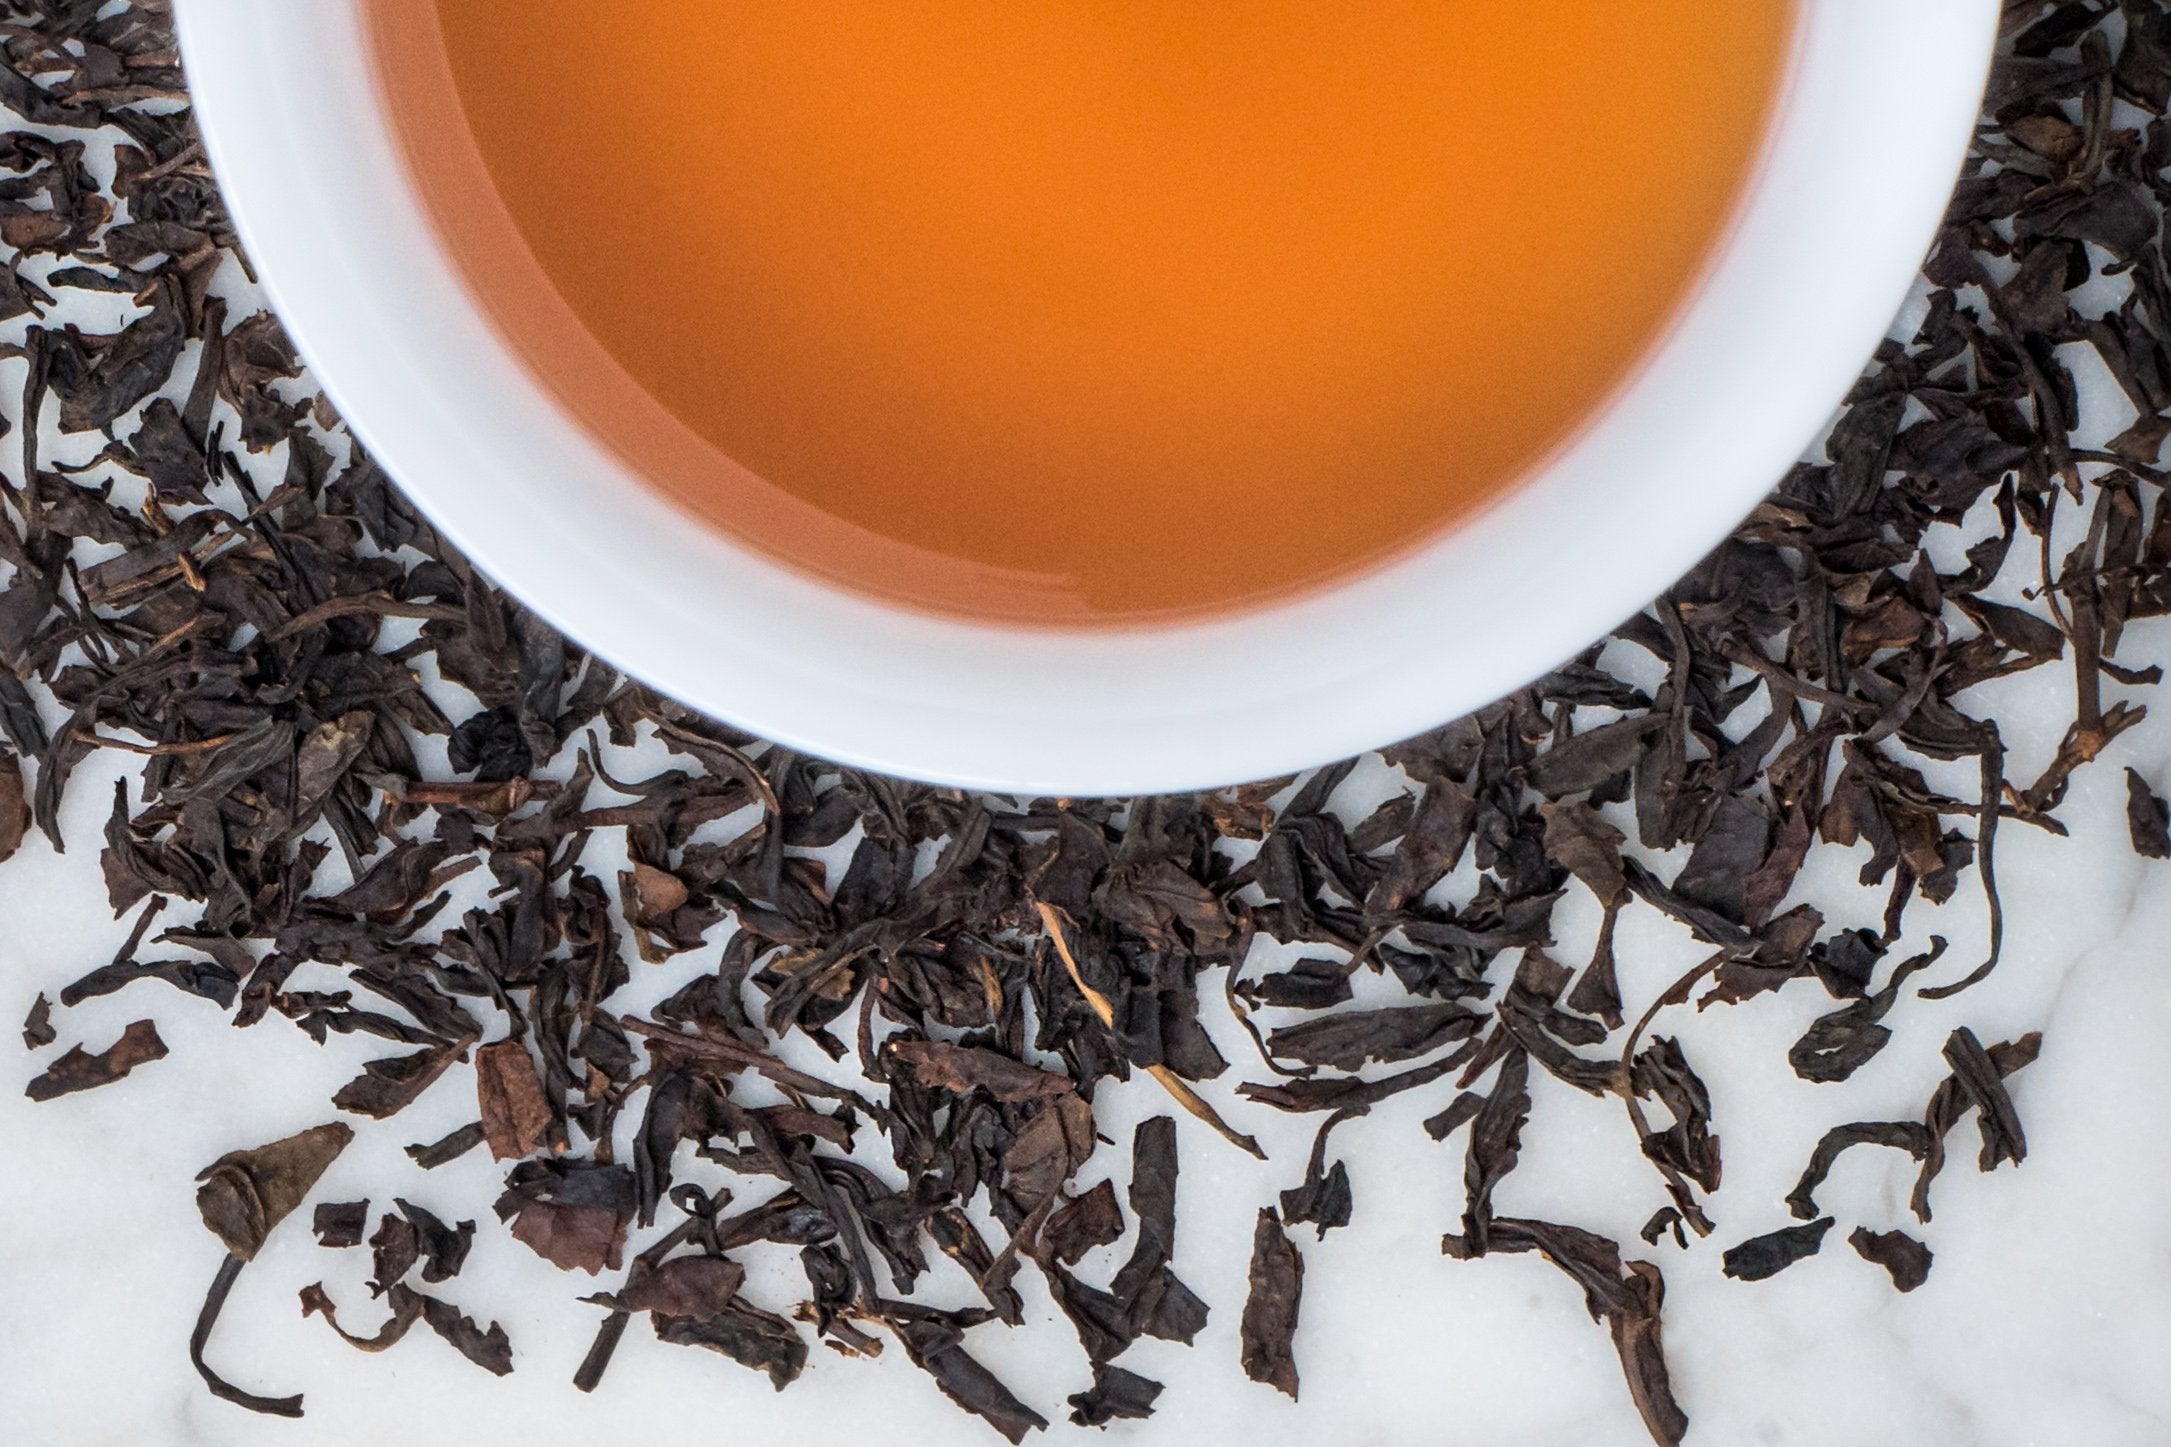 Perfectly Smoked Chinese Black Tea Leaves Surround A Cup of Brewed Lapsang Souchong